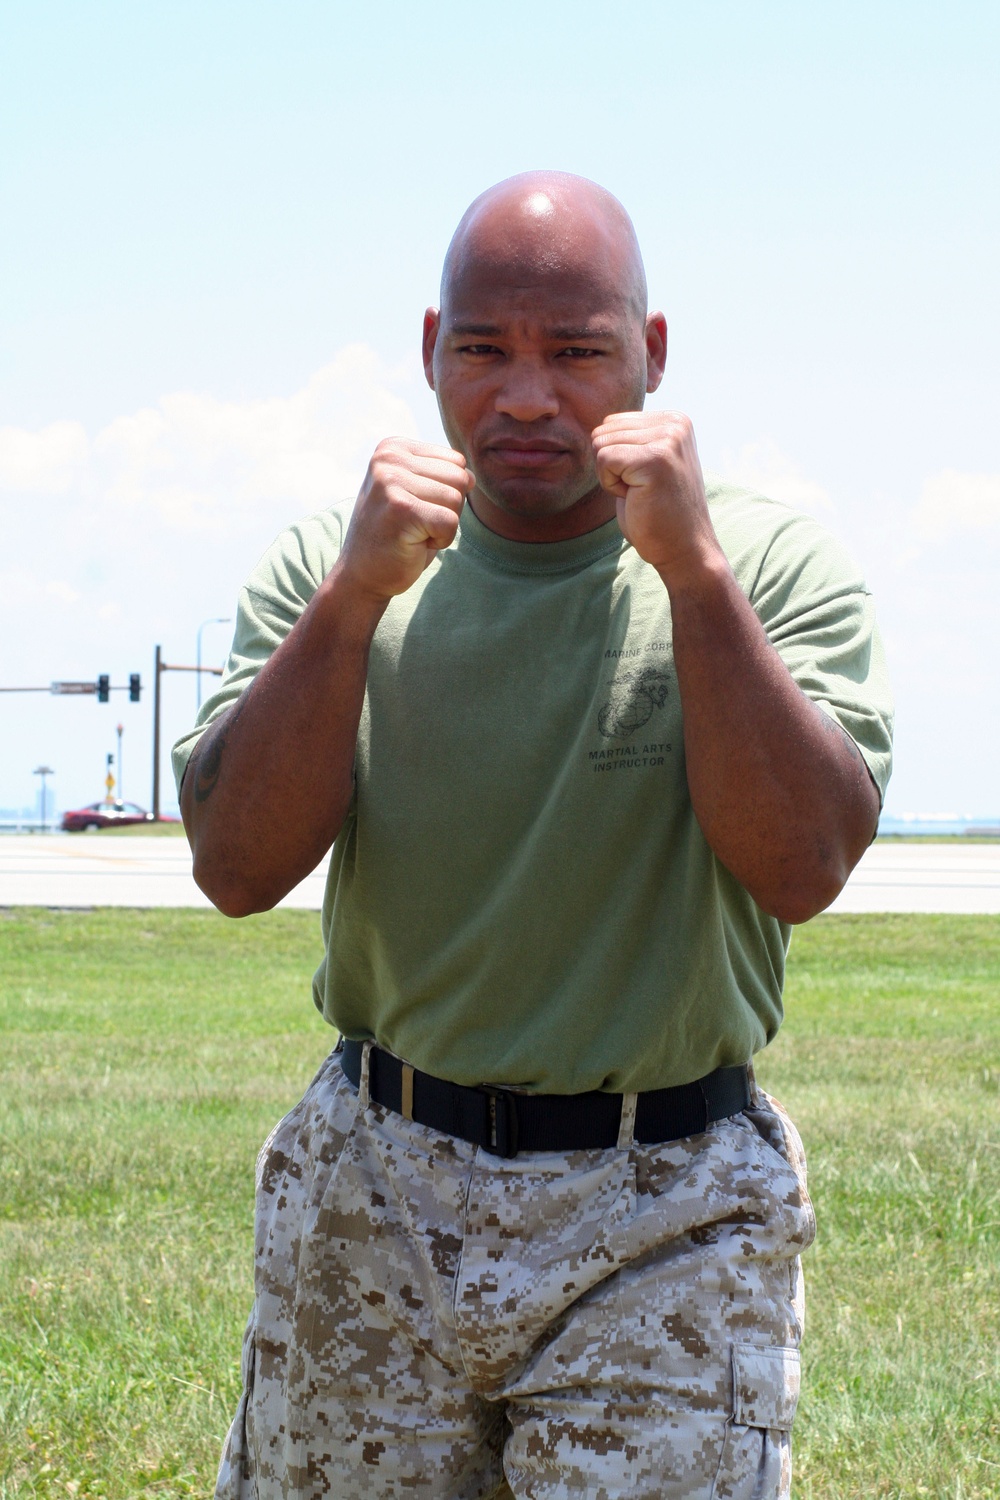 U.S. Central Command strength management chief reaches goals in martial arts program